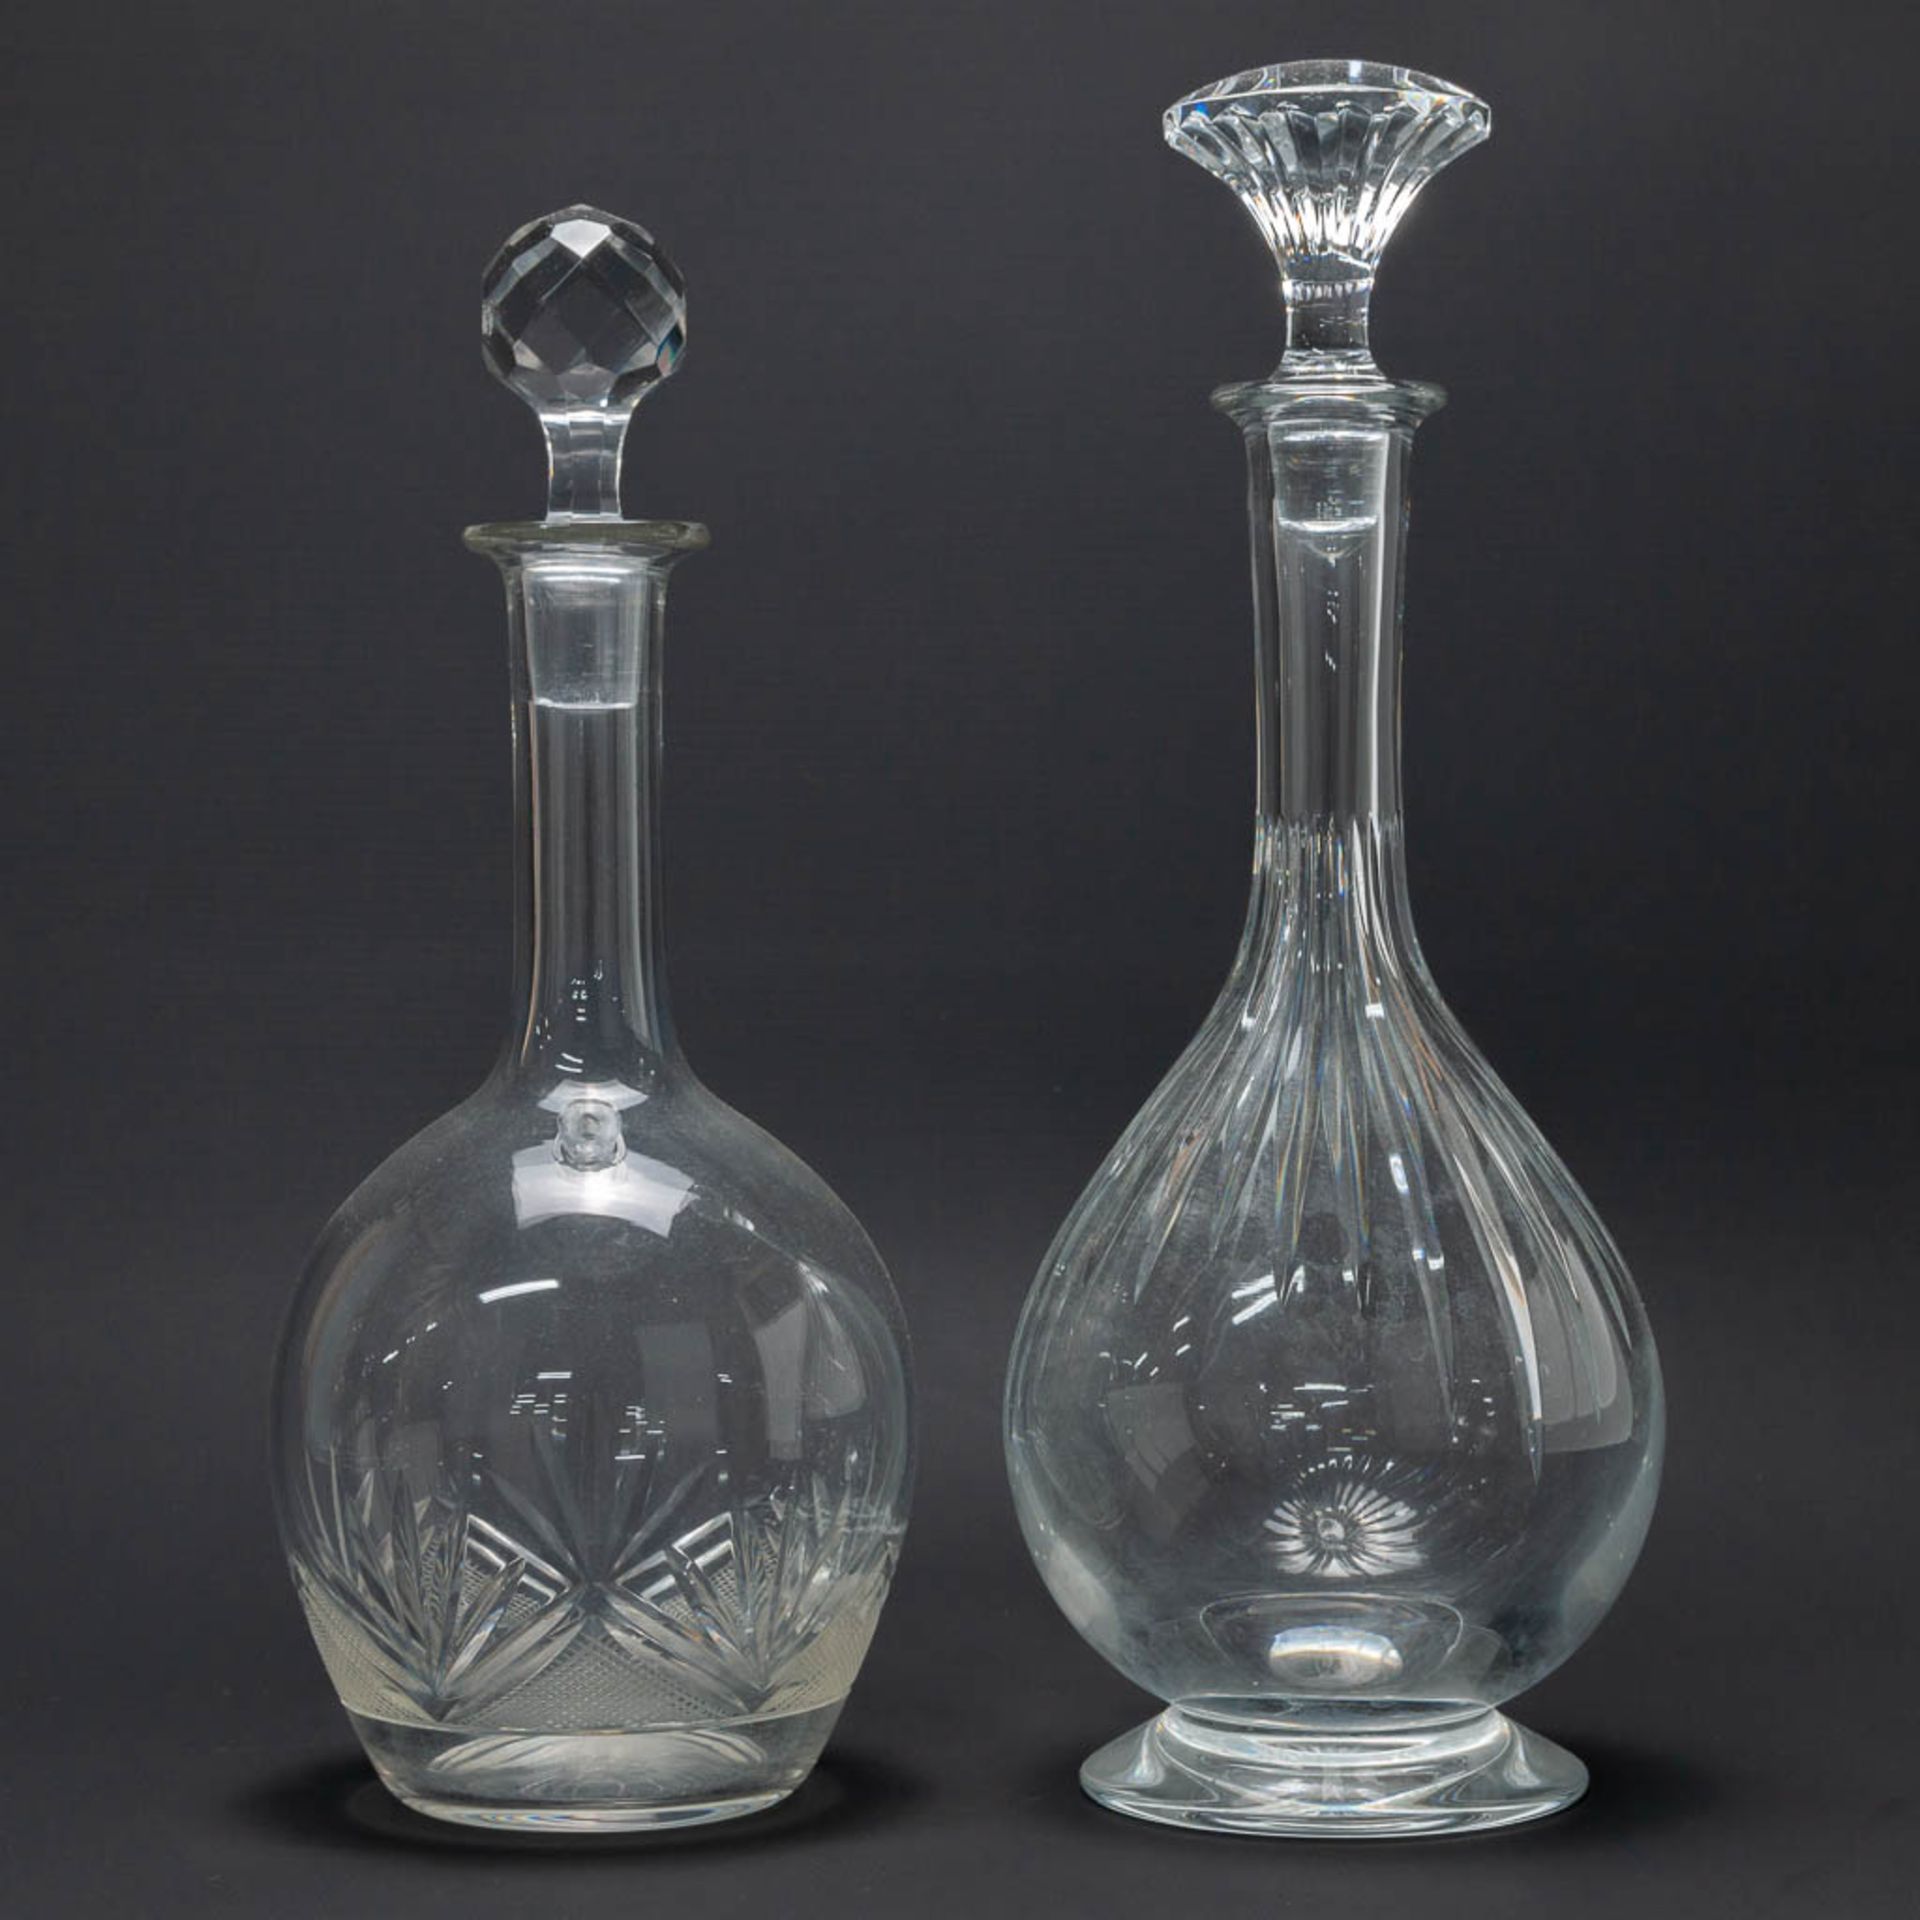 An assembled collection of 3 Baccarat decanters, a glass decanter and a Barbini Murano glass paperwe - Image 3 of 19